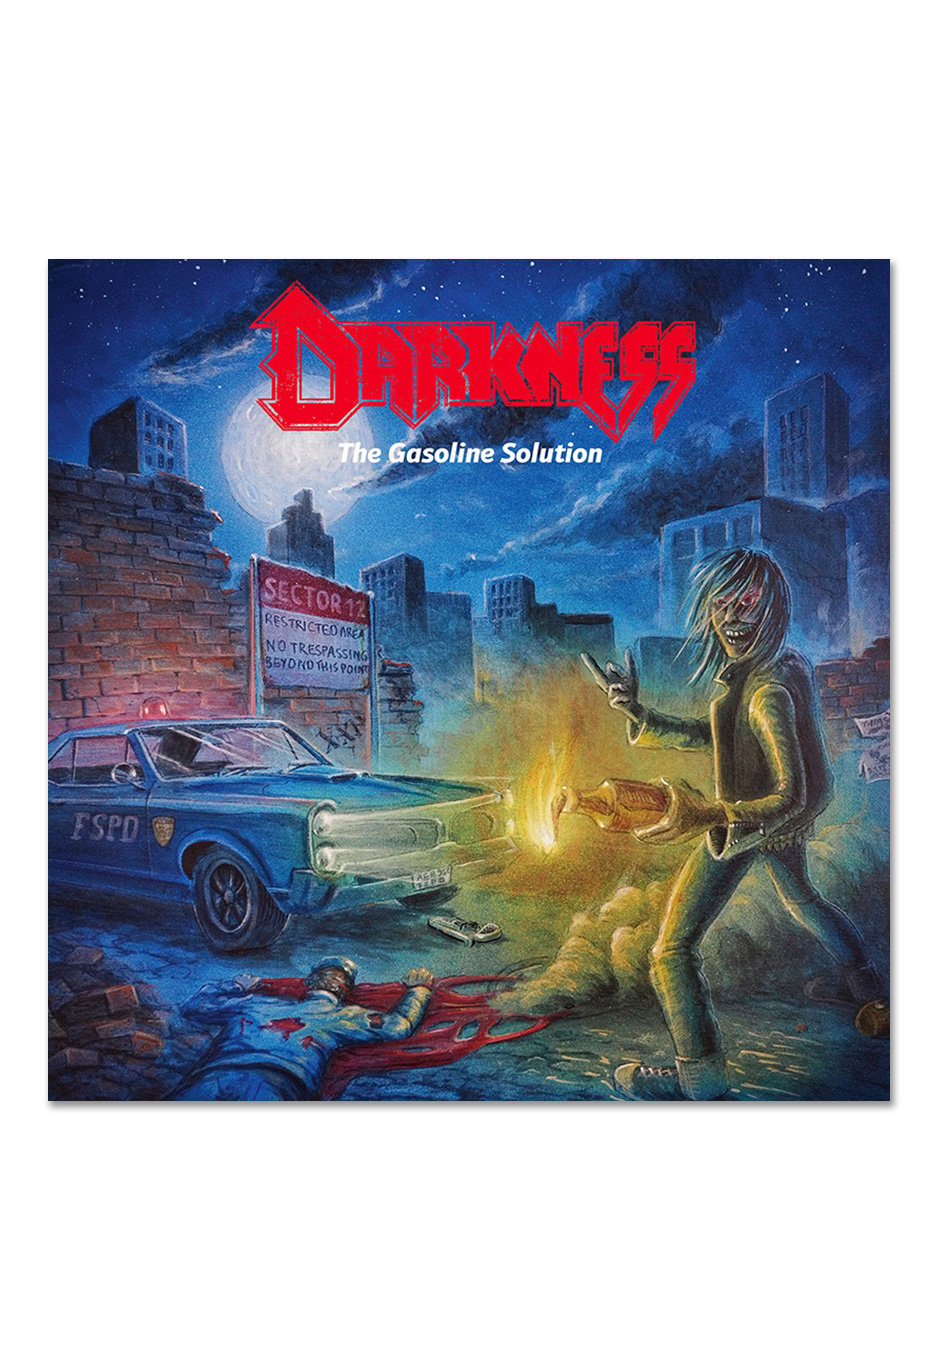 Darkness - The Gasoline Solution Ltd. Red - Colored Vinyl